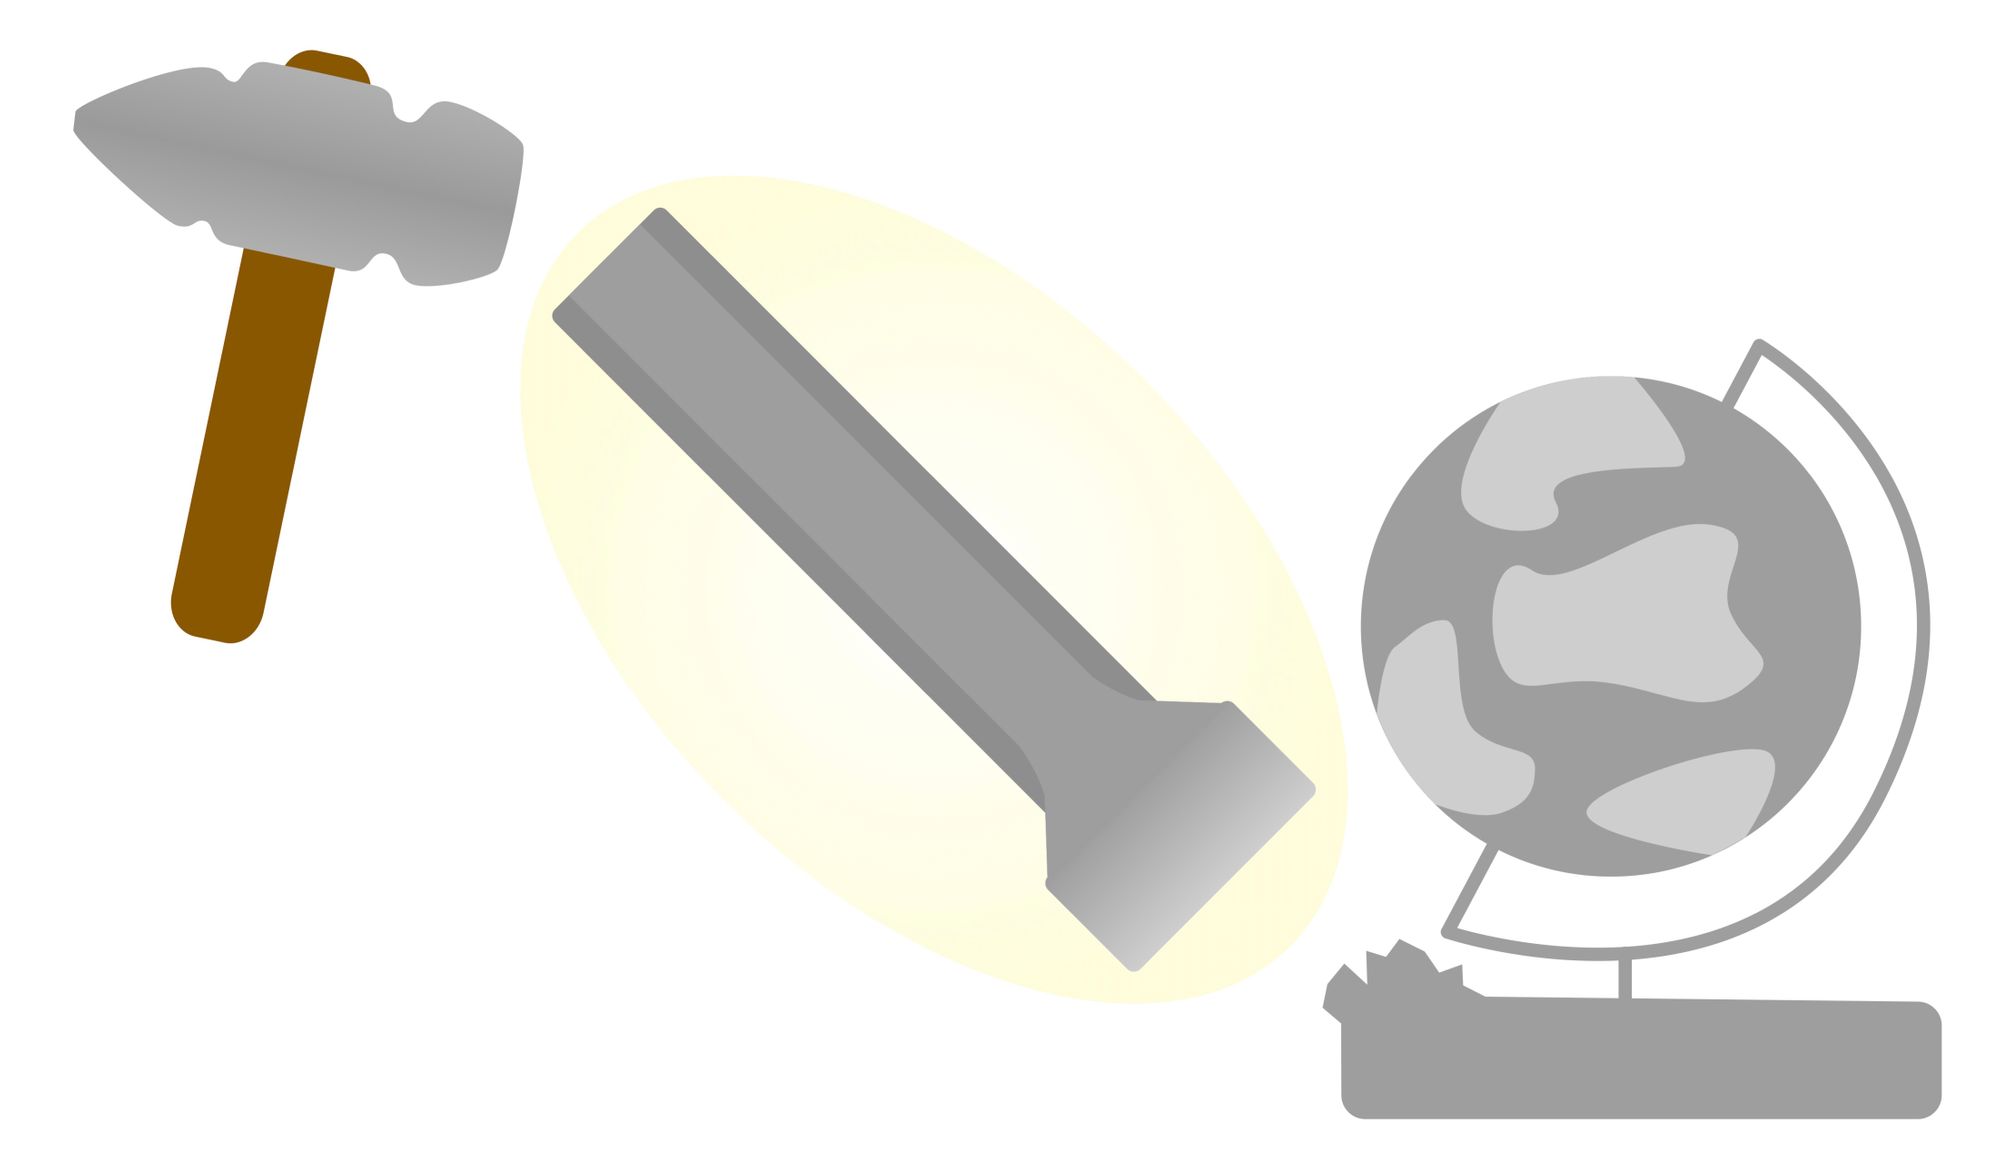 Image of a hammer and chisel being used to create a globe from stone.